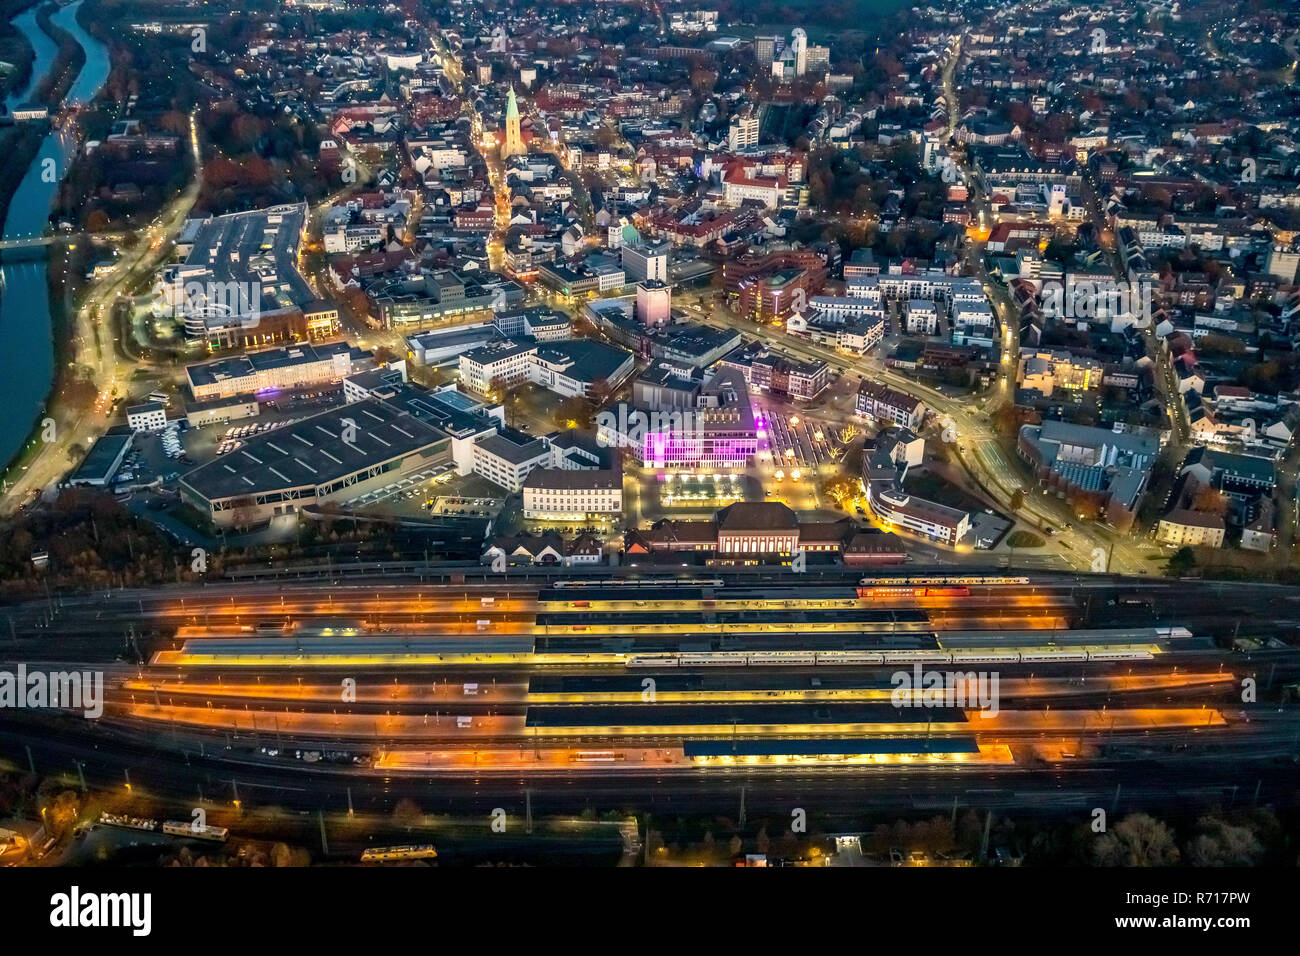 Aerial view, city center, night photo with central station, Hamm, Ruhr area, North Rhine-Westphalia, German Stock Photo